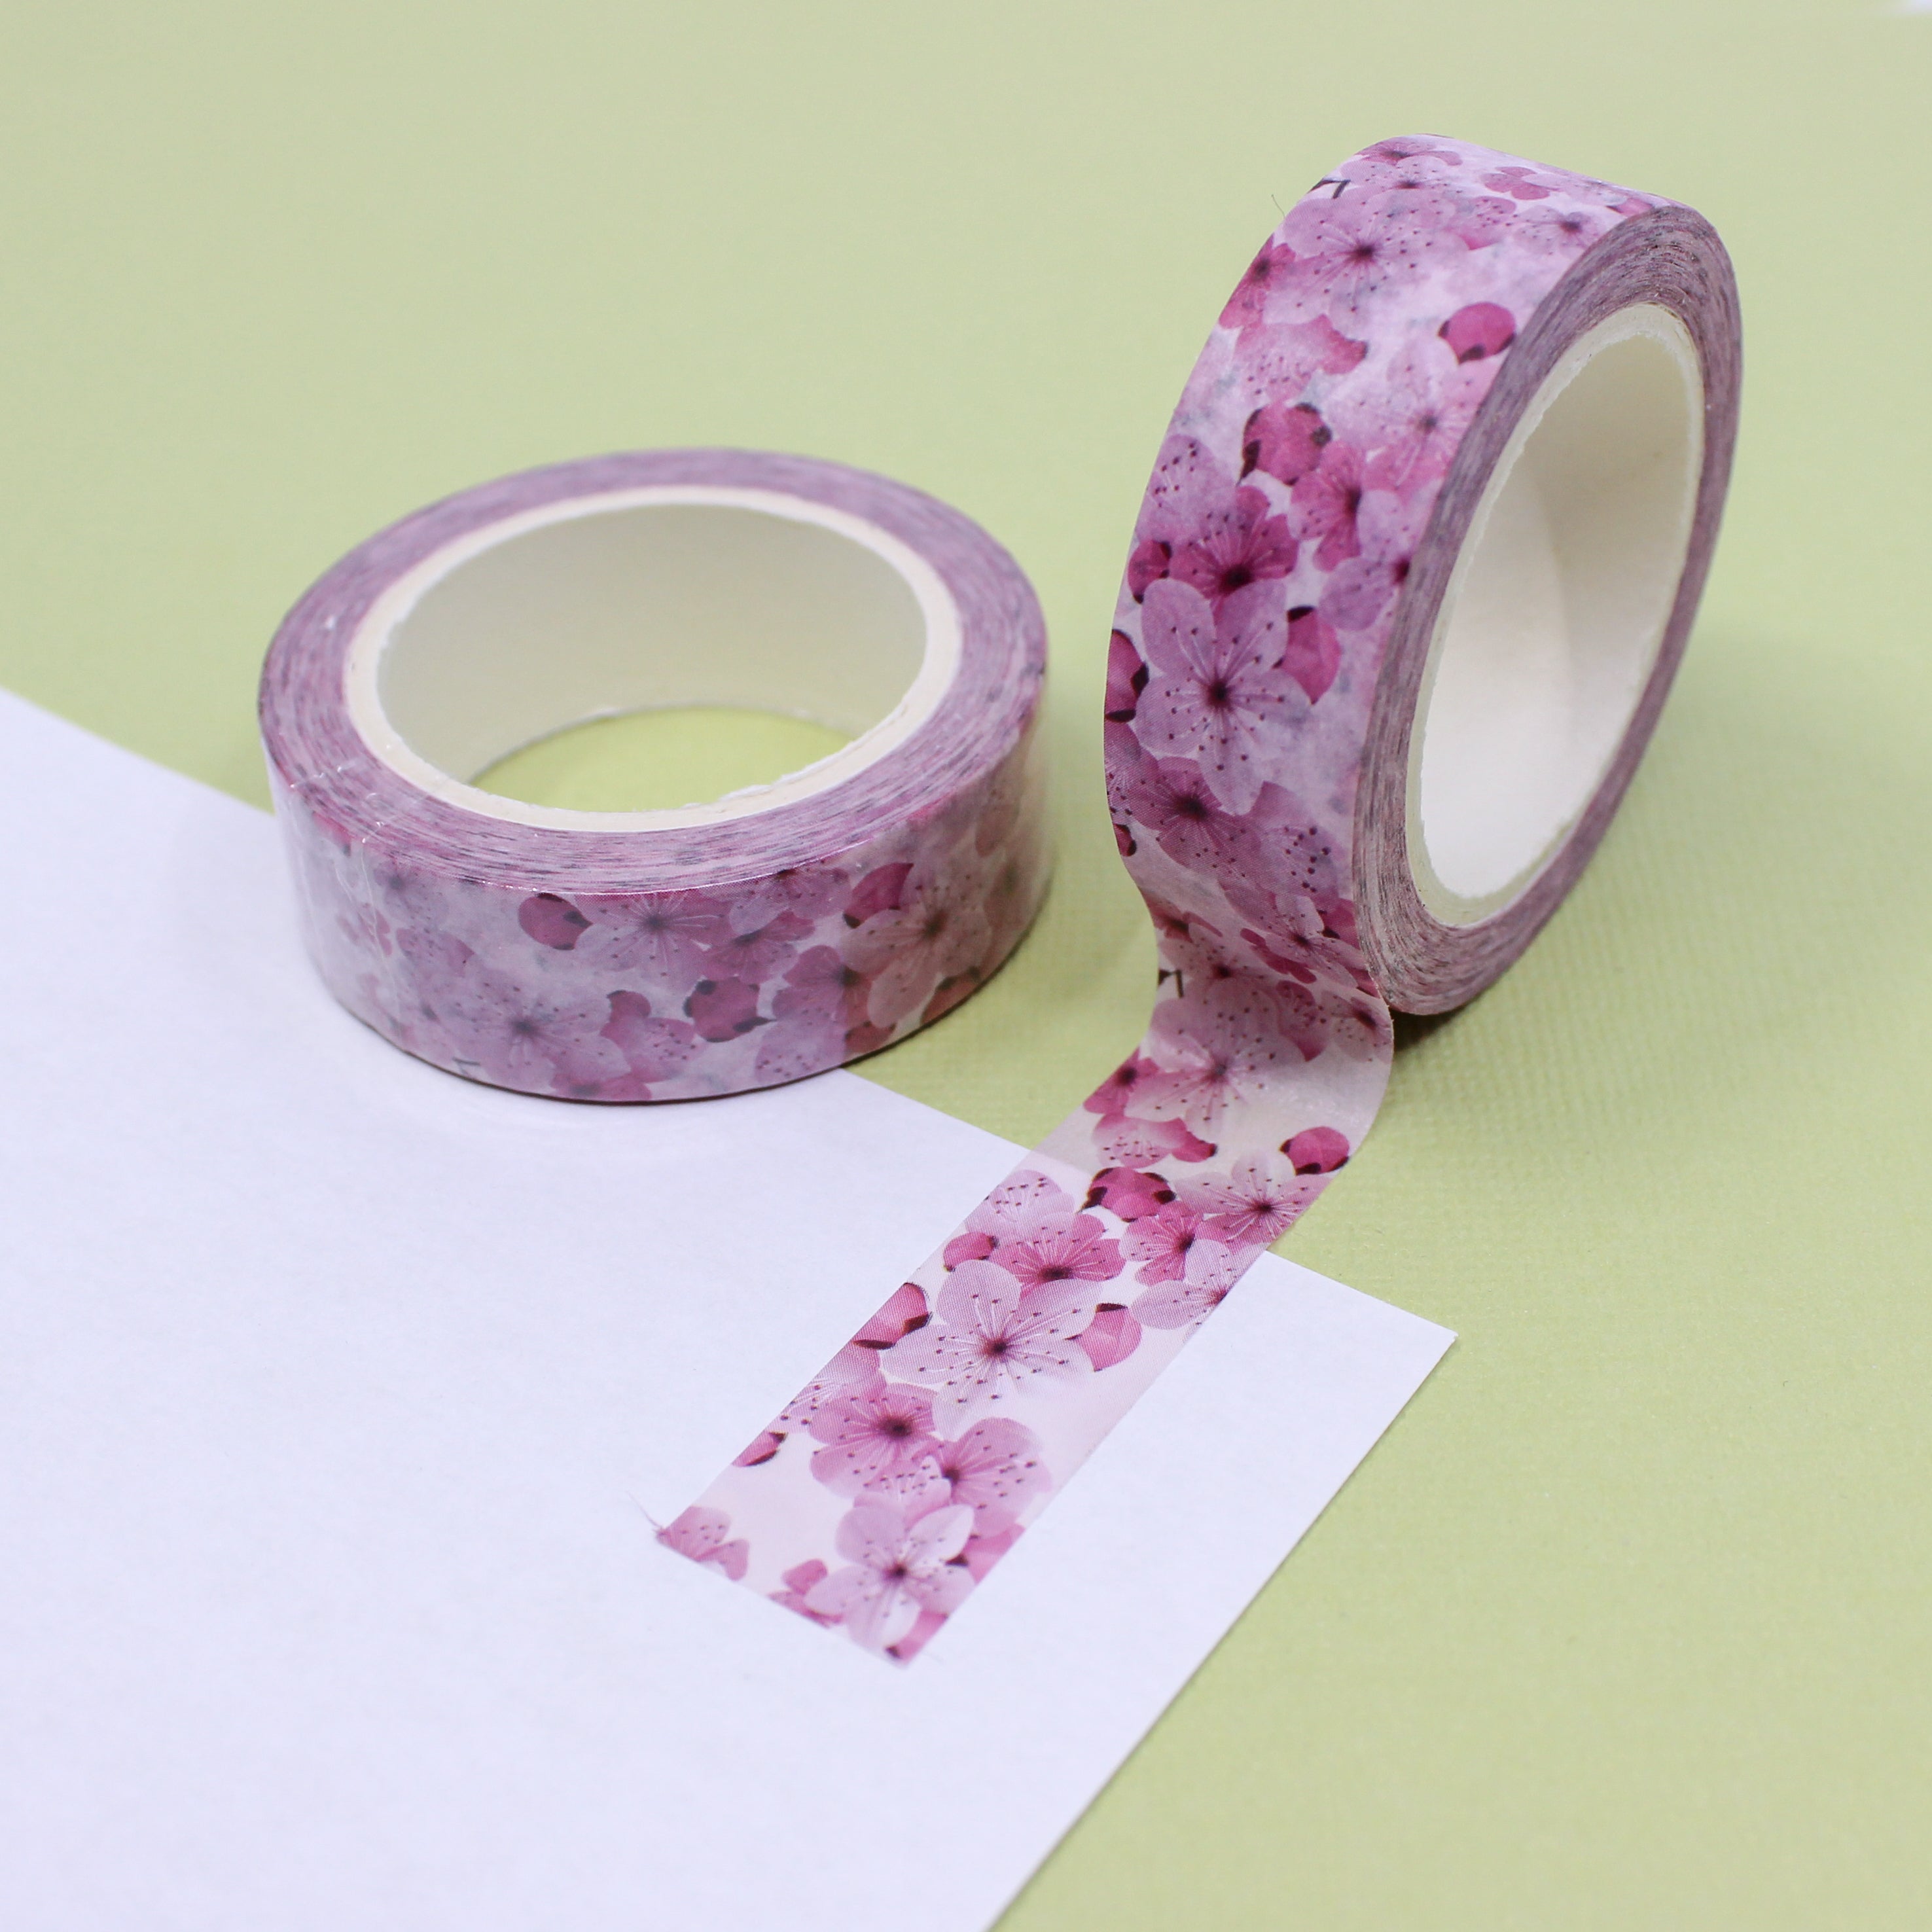 This a cherry blossom floral collections pattern washi tape from BBB Supplies Craft Shop